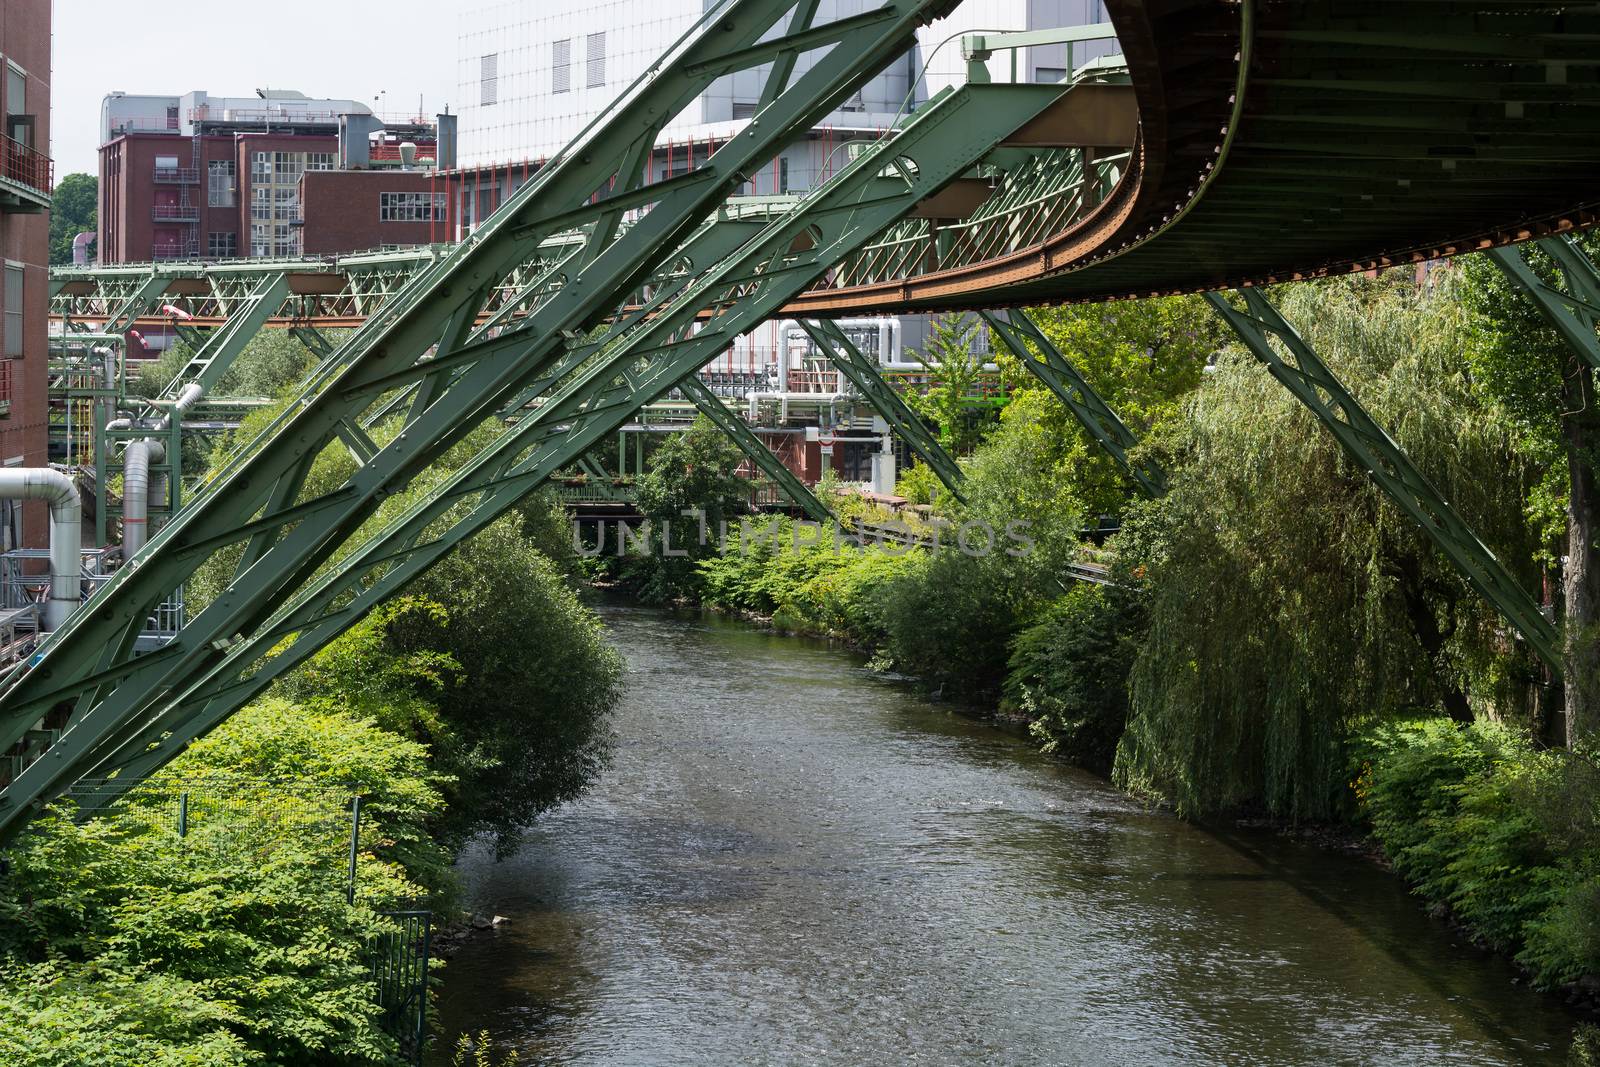 The supporting framework of the Wuppertaler suspension railway consists of a steel framework with inclined supports and suspended steel bridges so-called Rieppelträger. 